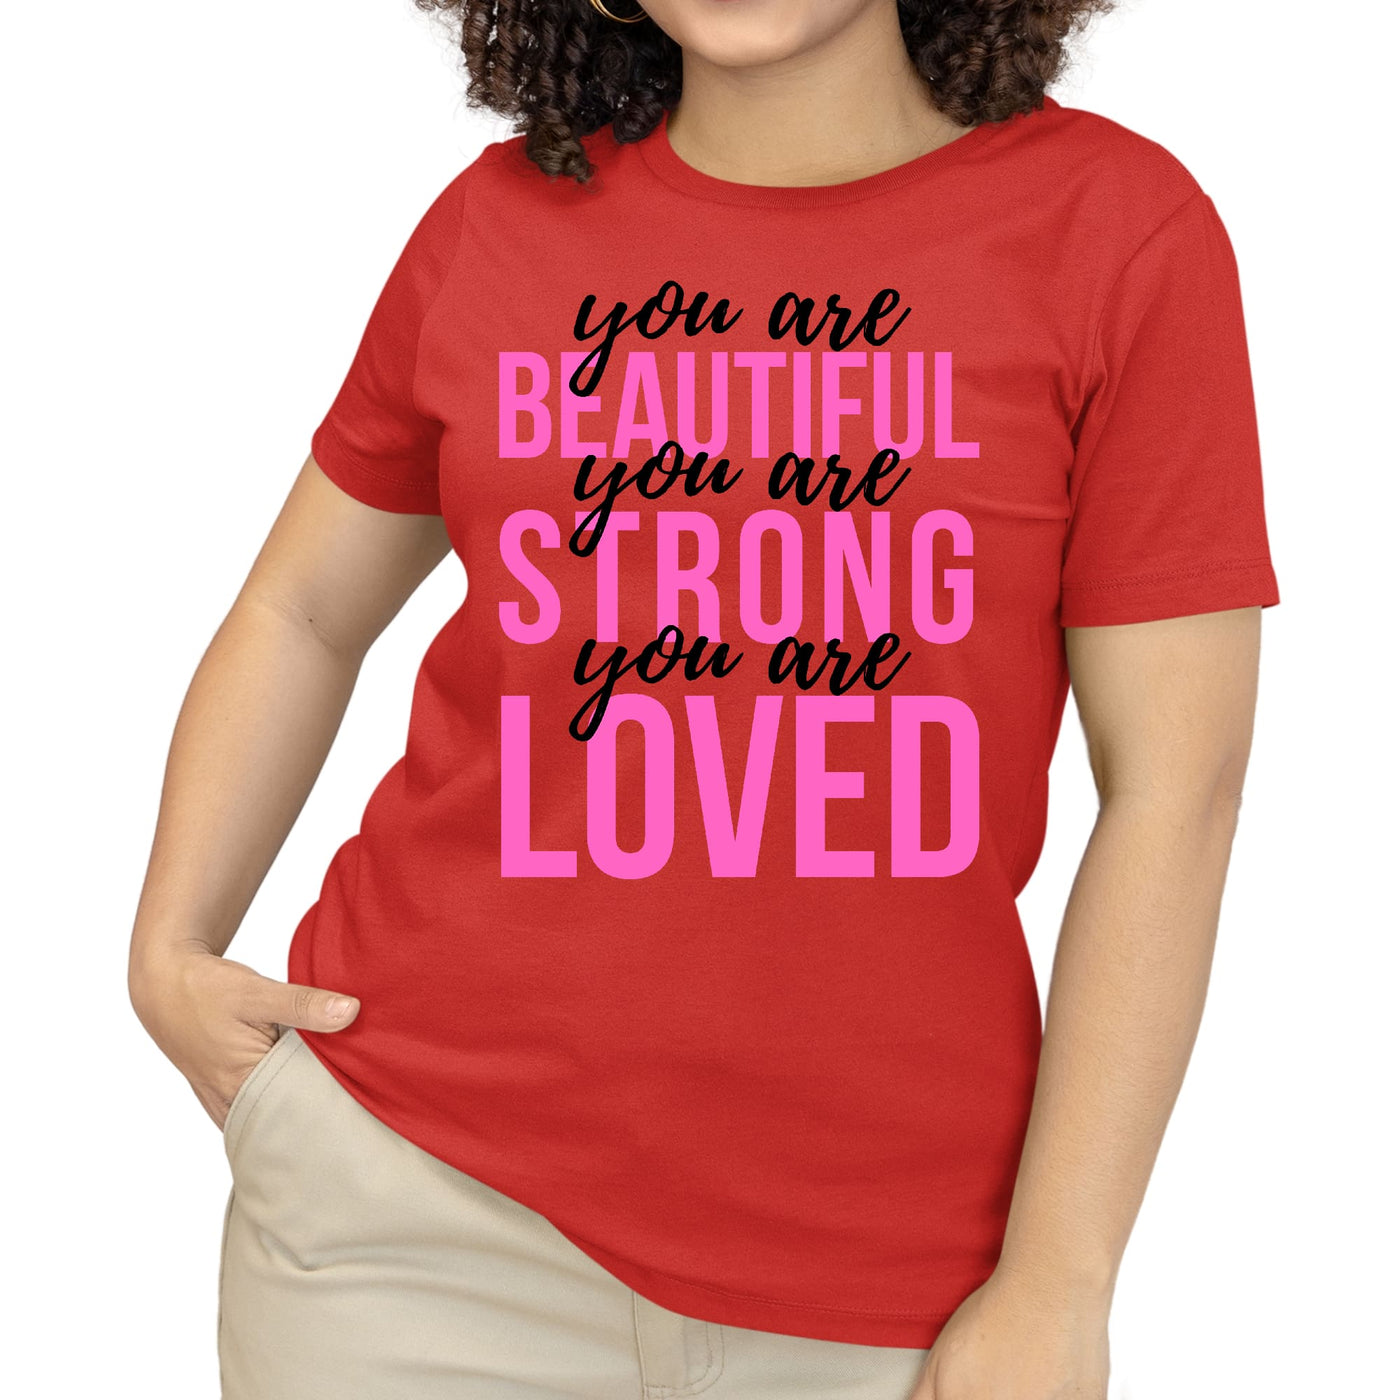 Womens T-shirt You Are Beautiful Strong Loved Inspiration Affirmation - Womens